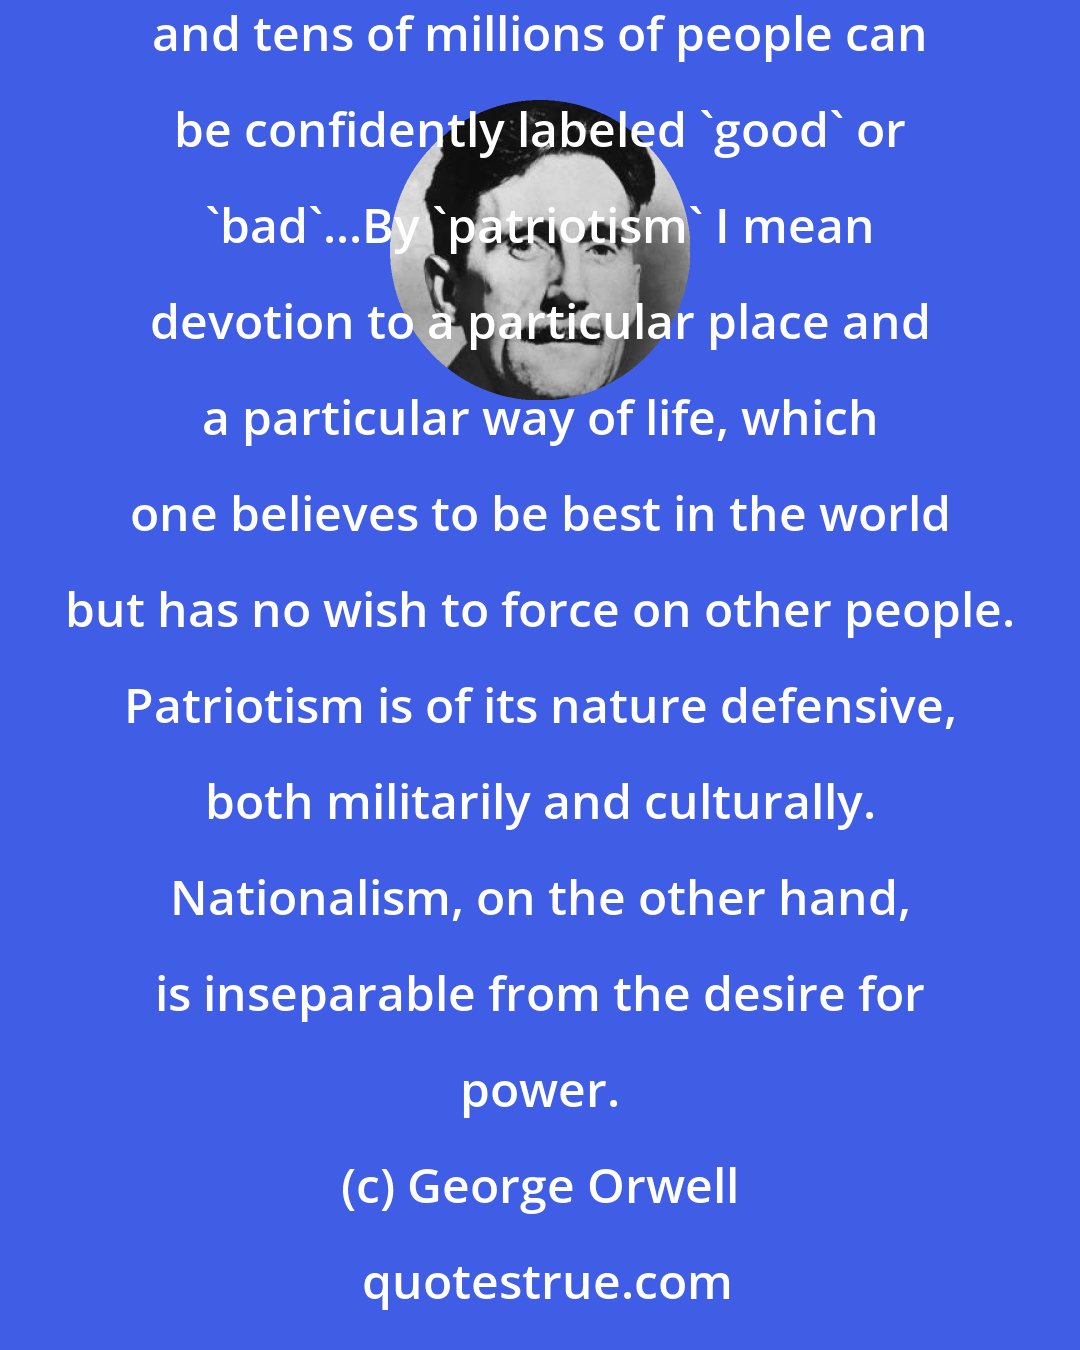 George Orwell: By 'nationalism' I mean first of all the habit of assuming that human beings can be classified like insects and that whole blocks of millions and tens of millions of people can be confidently labeled 'good' or 'bad'...By 'patriotism' I mean devotion to a particular place and a particular way of life, which one believes to be best in the world but has no wish to force on other people. Patriotism is of its nature defensive, both militarily and culturally. Nationalism, on the other hand, is inseparable from the desire for power.